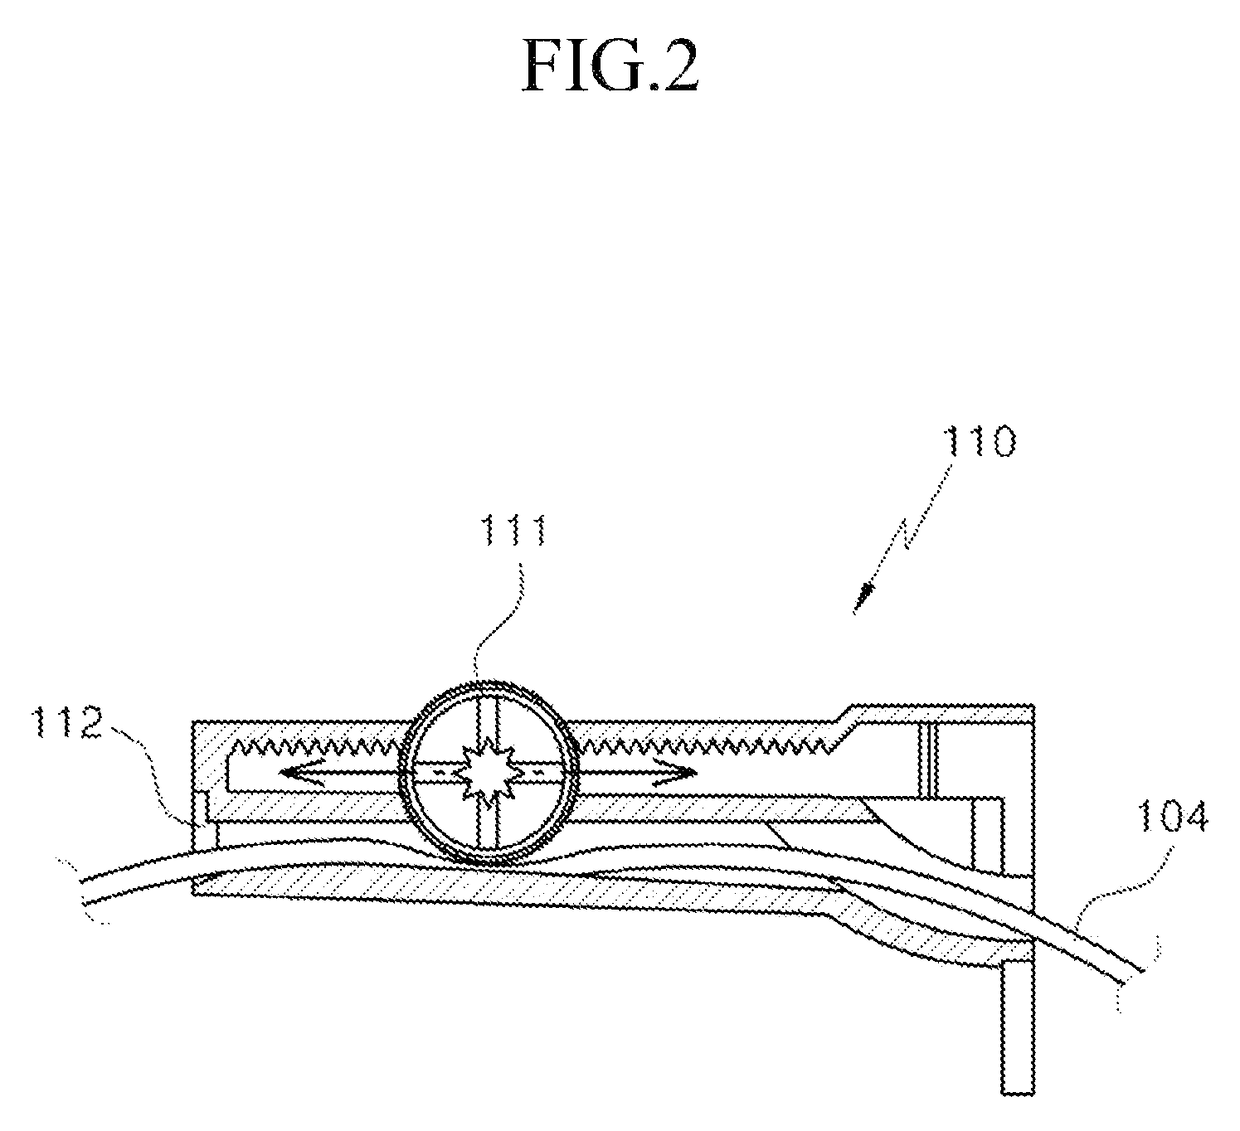 Linear flow regulating apparatus for intravenous infusion